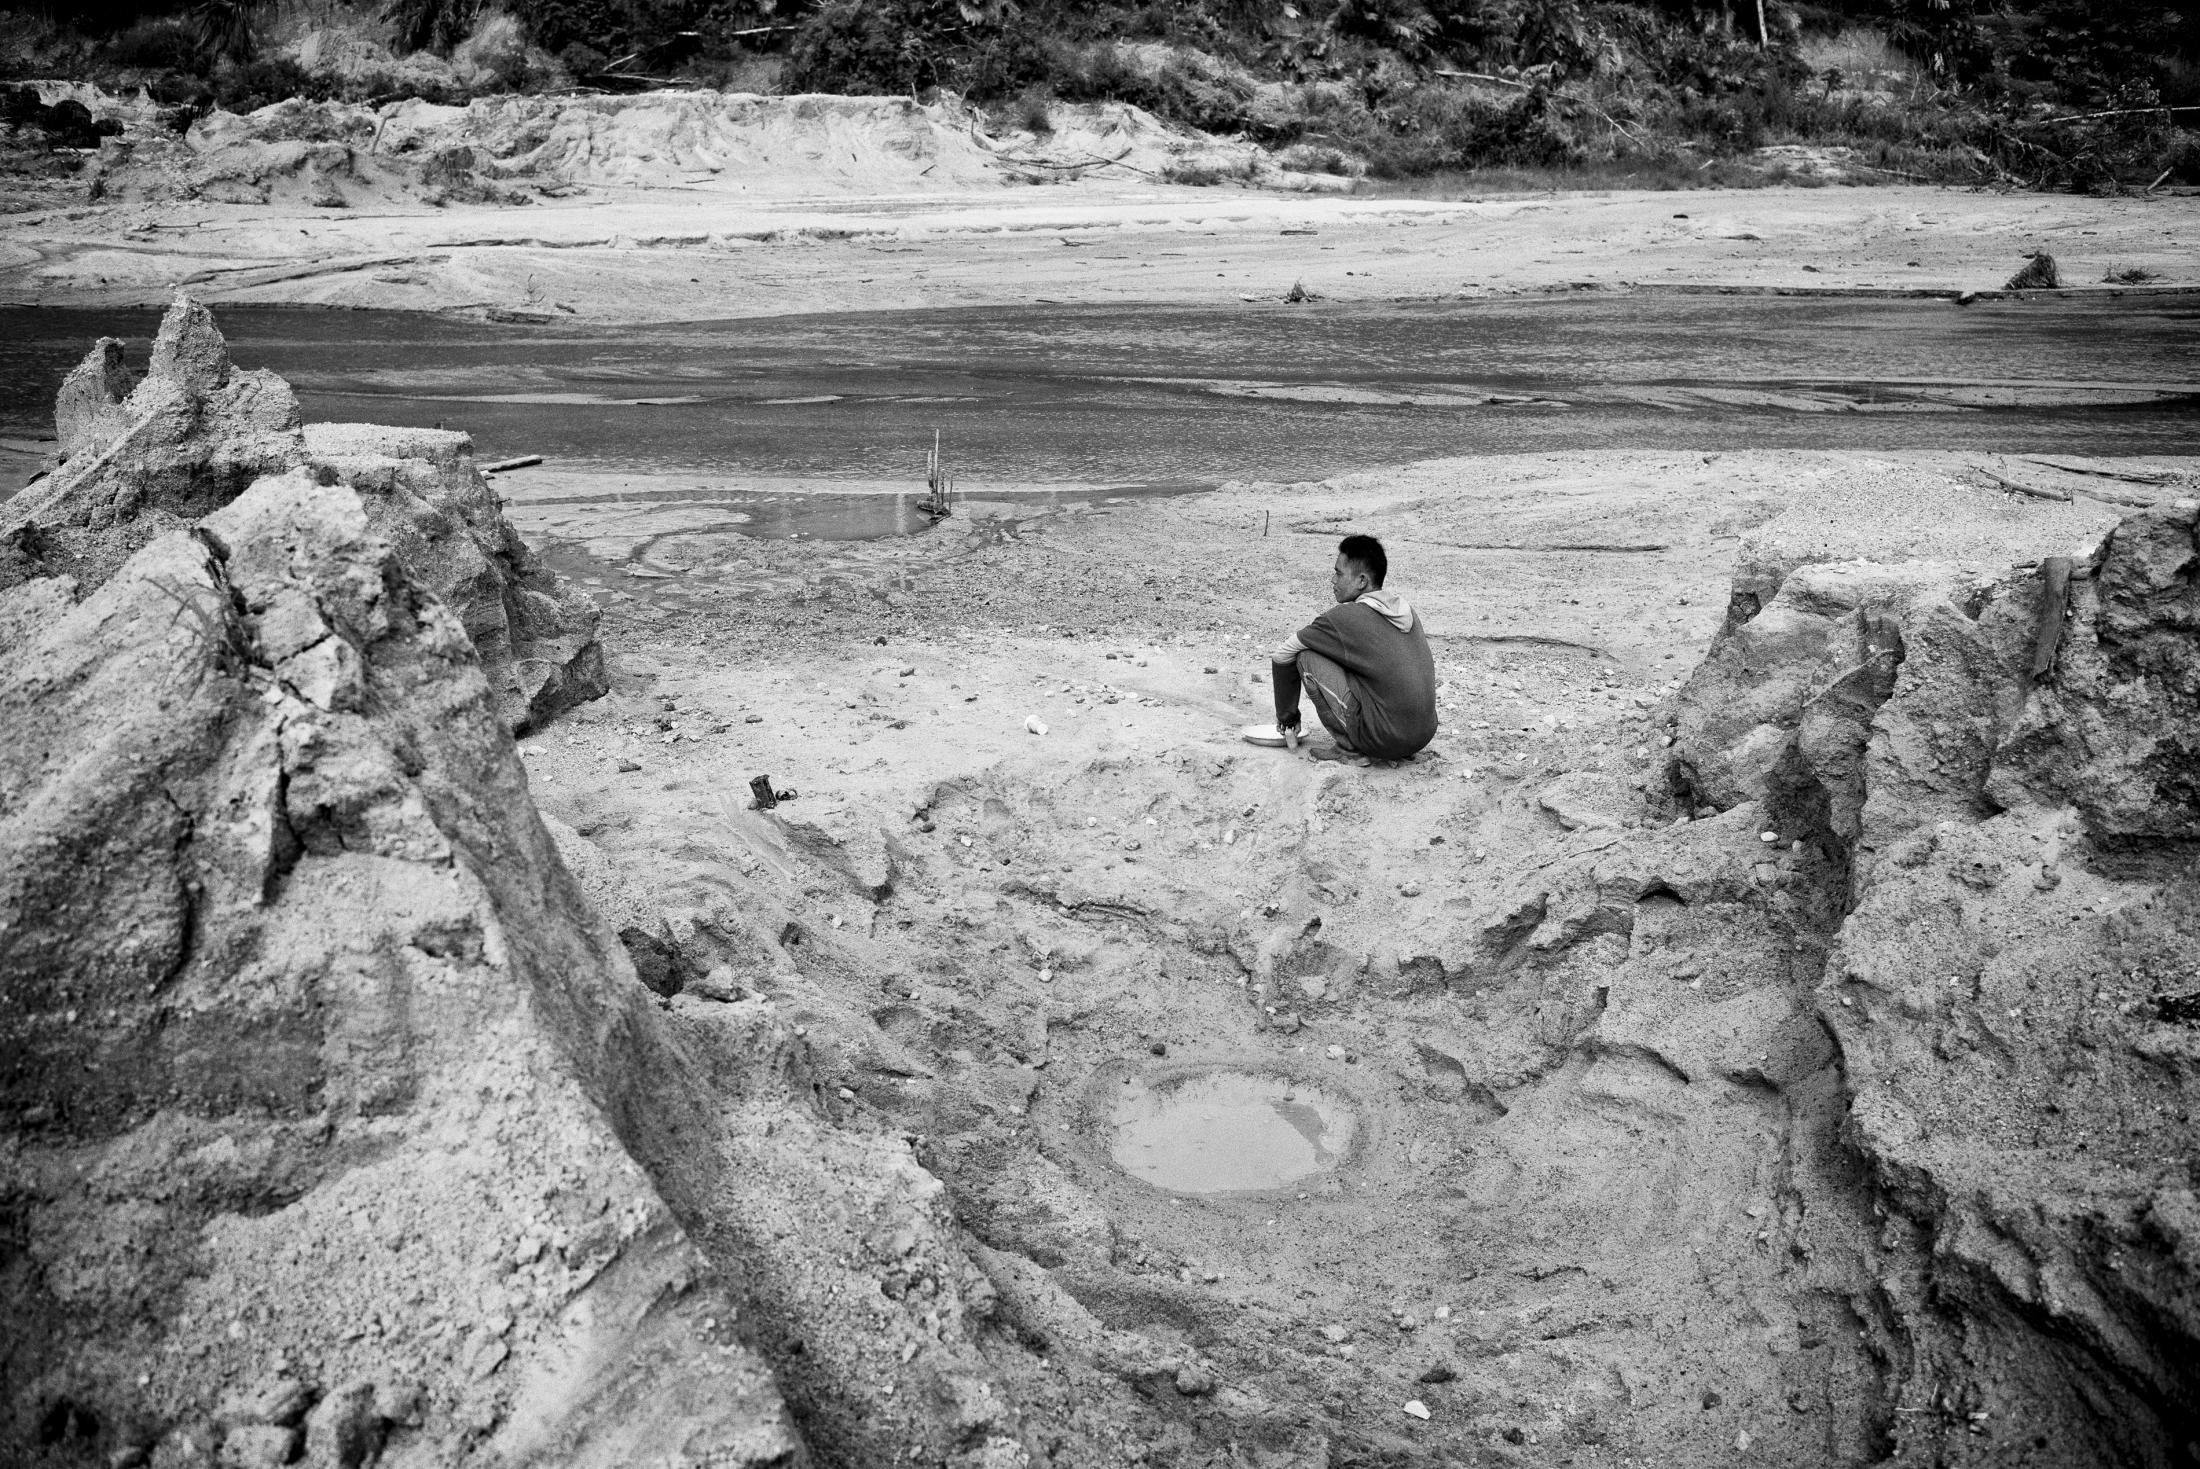 The Cursed Island of Tin - Riki, an illegal tin miner, sits and rests at an open pit...